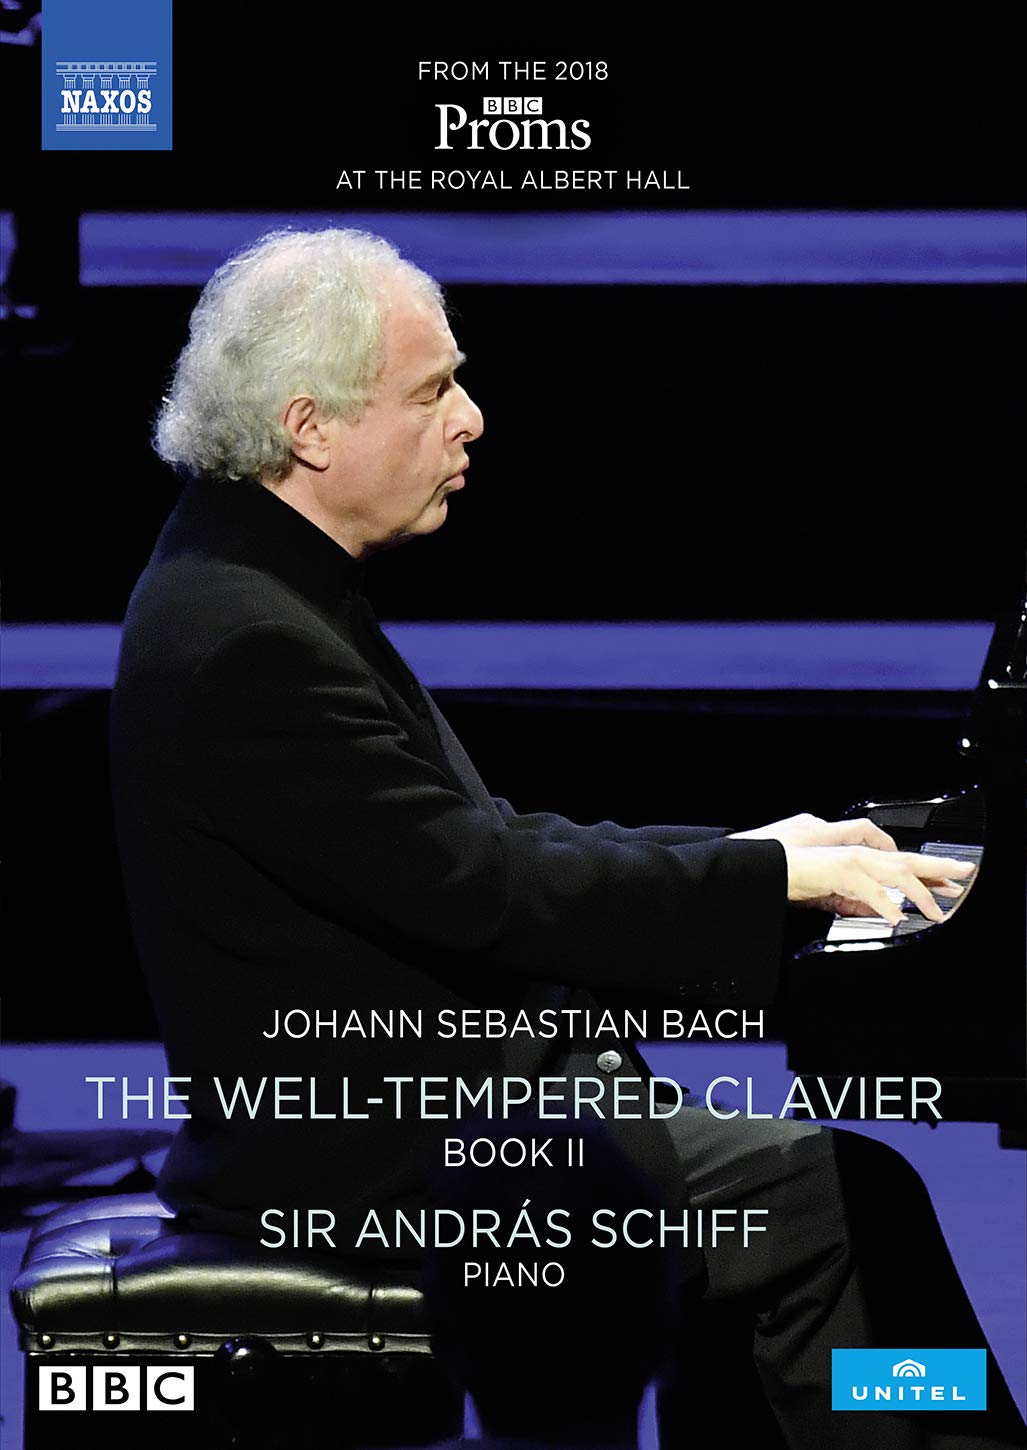 BACH: THE WELL-TEMPERED CLAVIER BOOKII - SIR ANDRAS SCHIFF